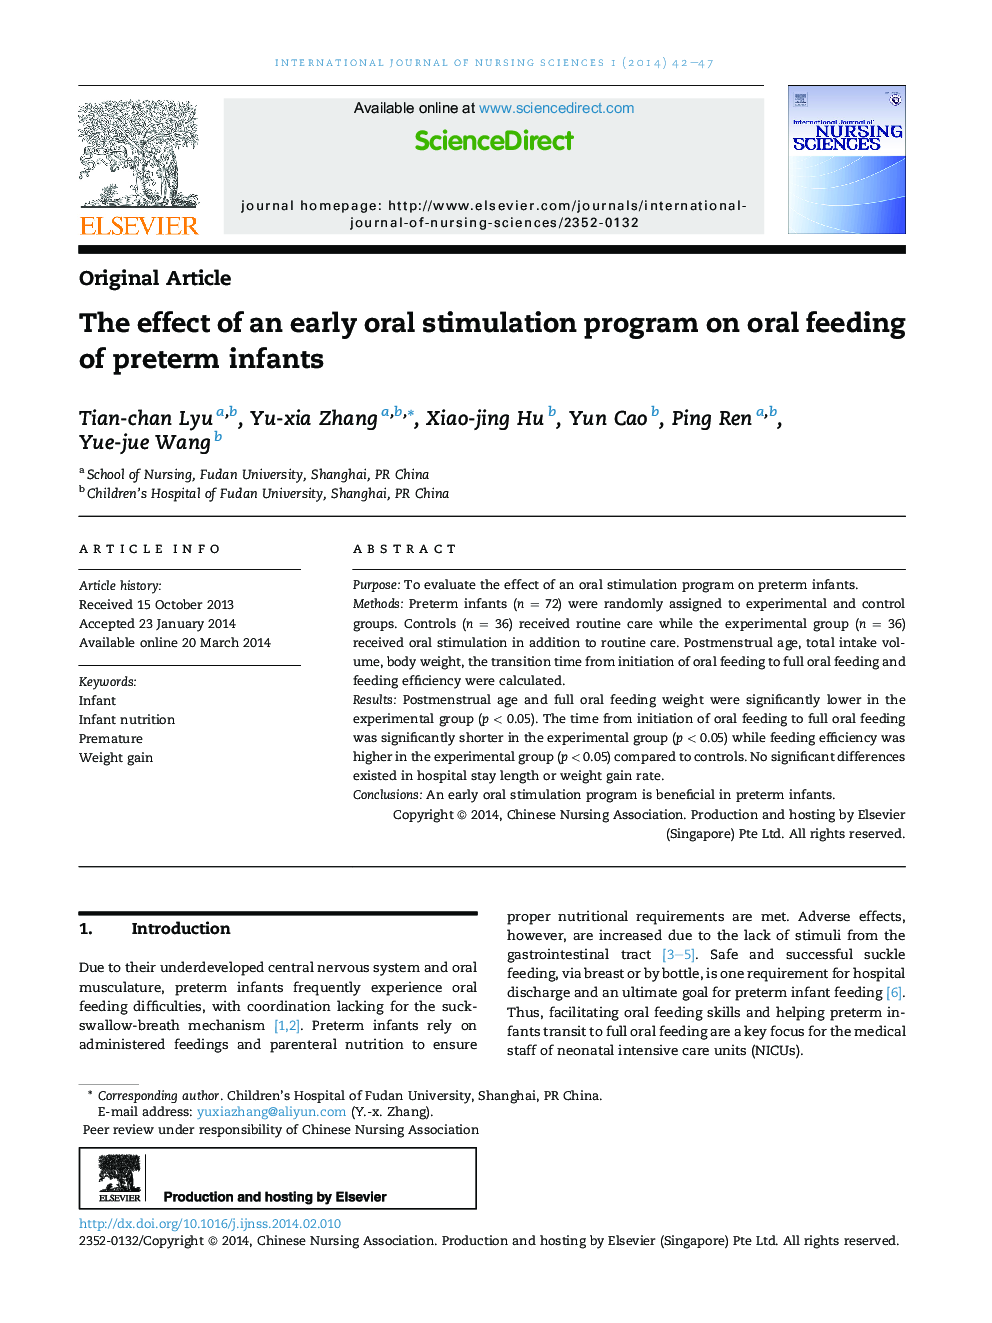 The effect of an early oral stimulation program on oral feeding of preterm infants 